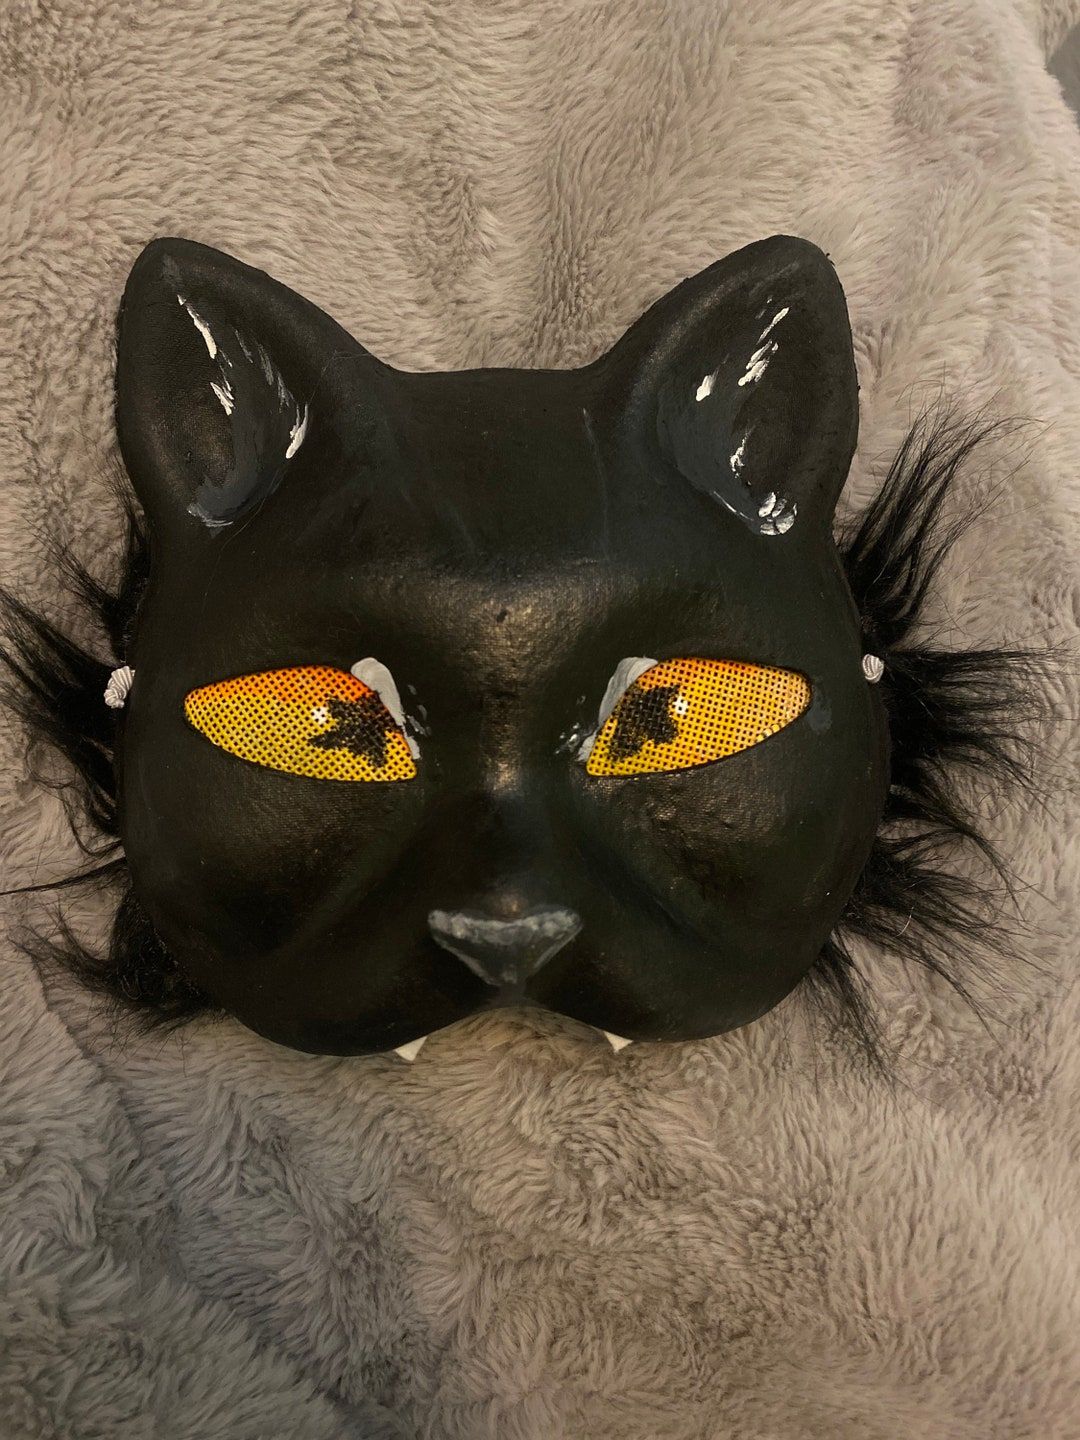 Commissions - Therian/cosplay/furry Mask commissions !